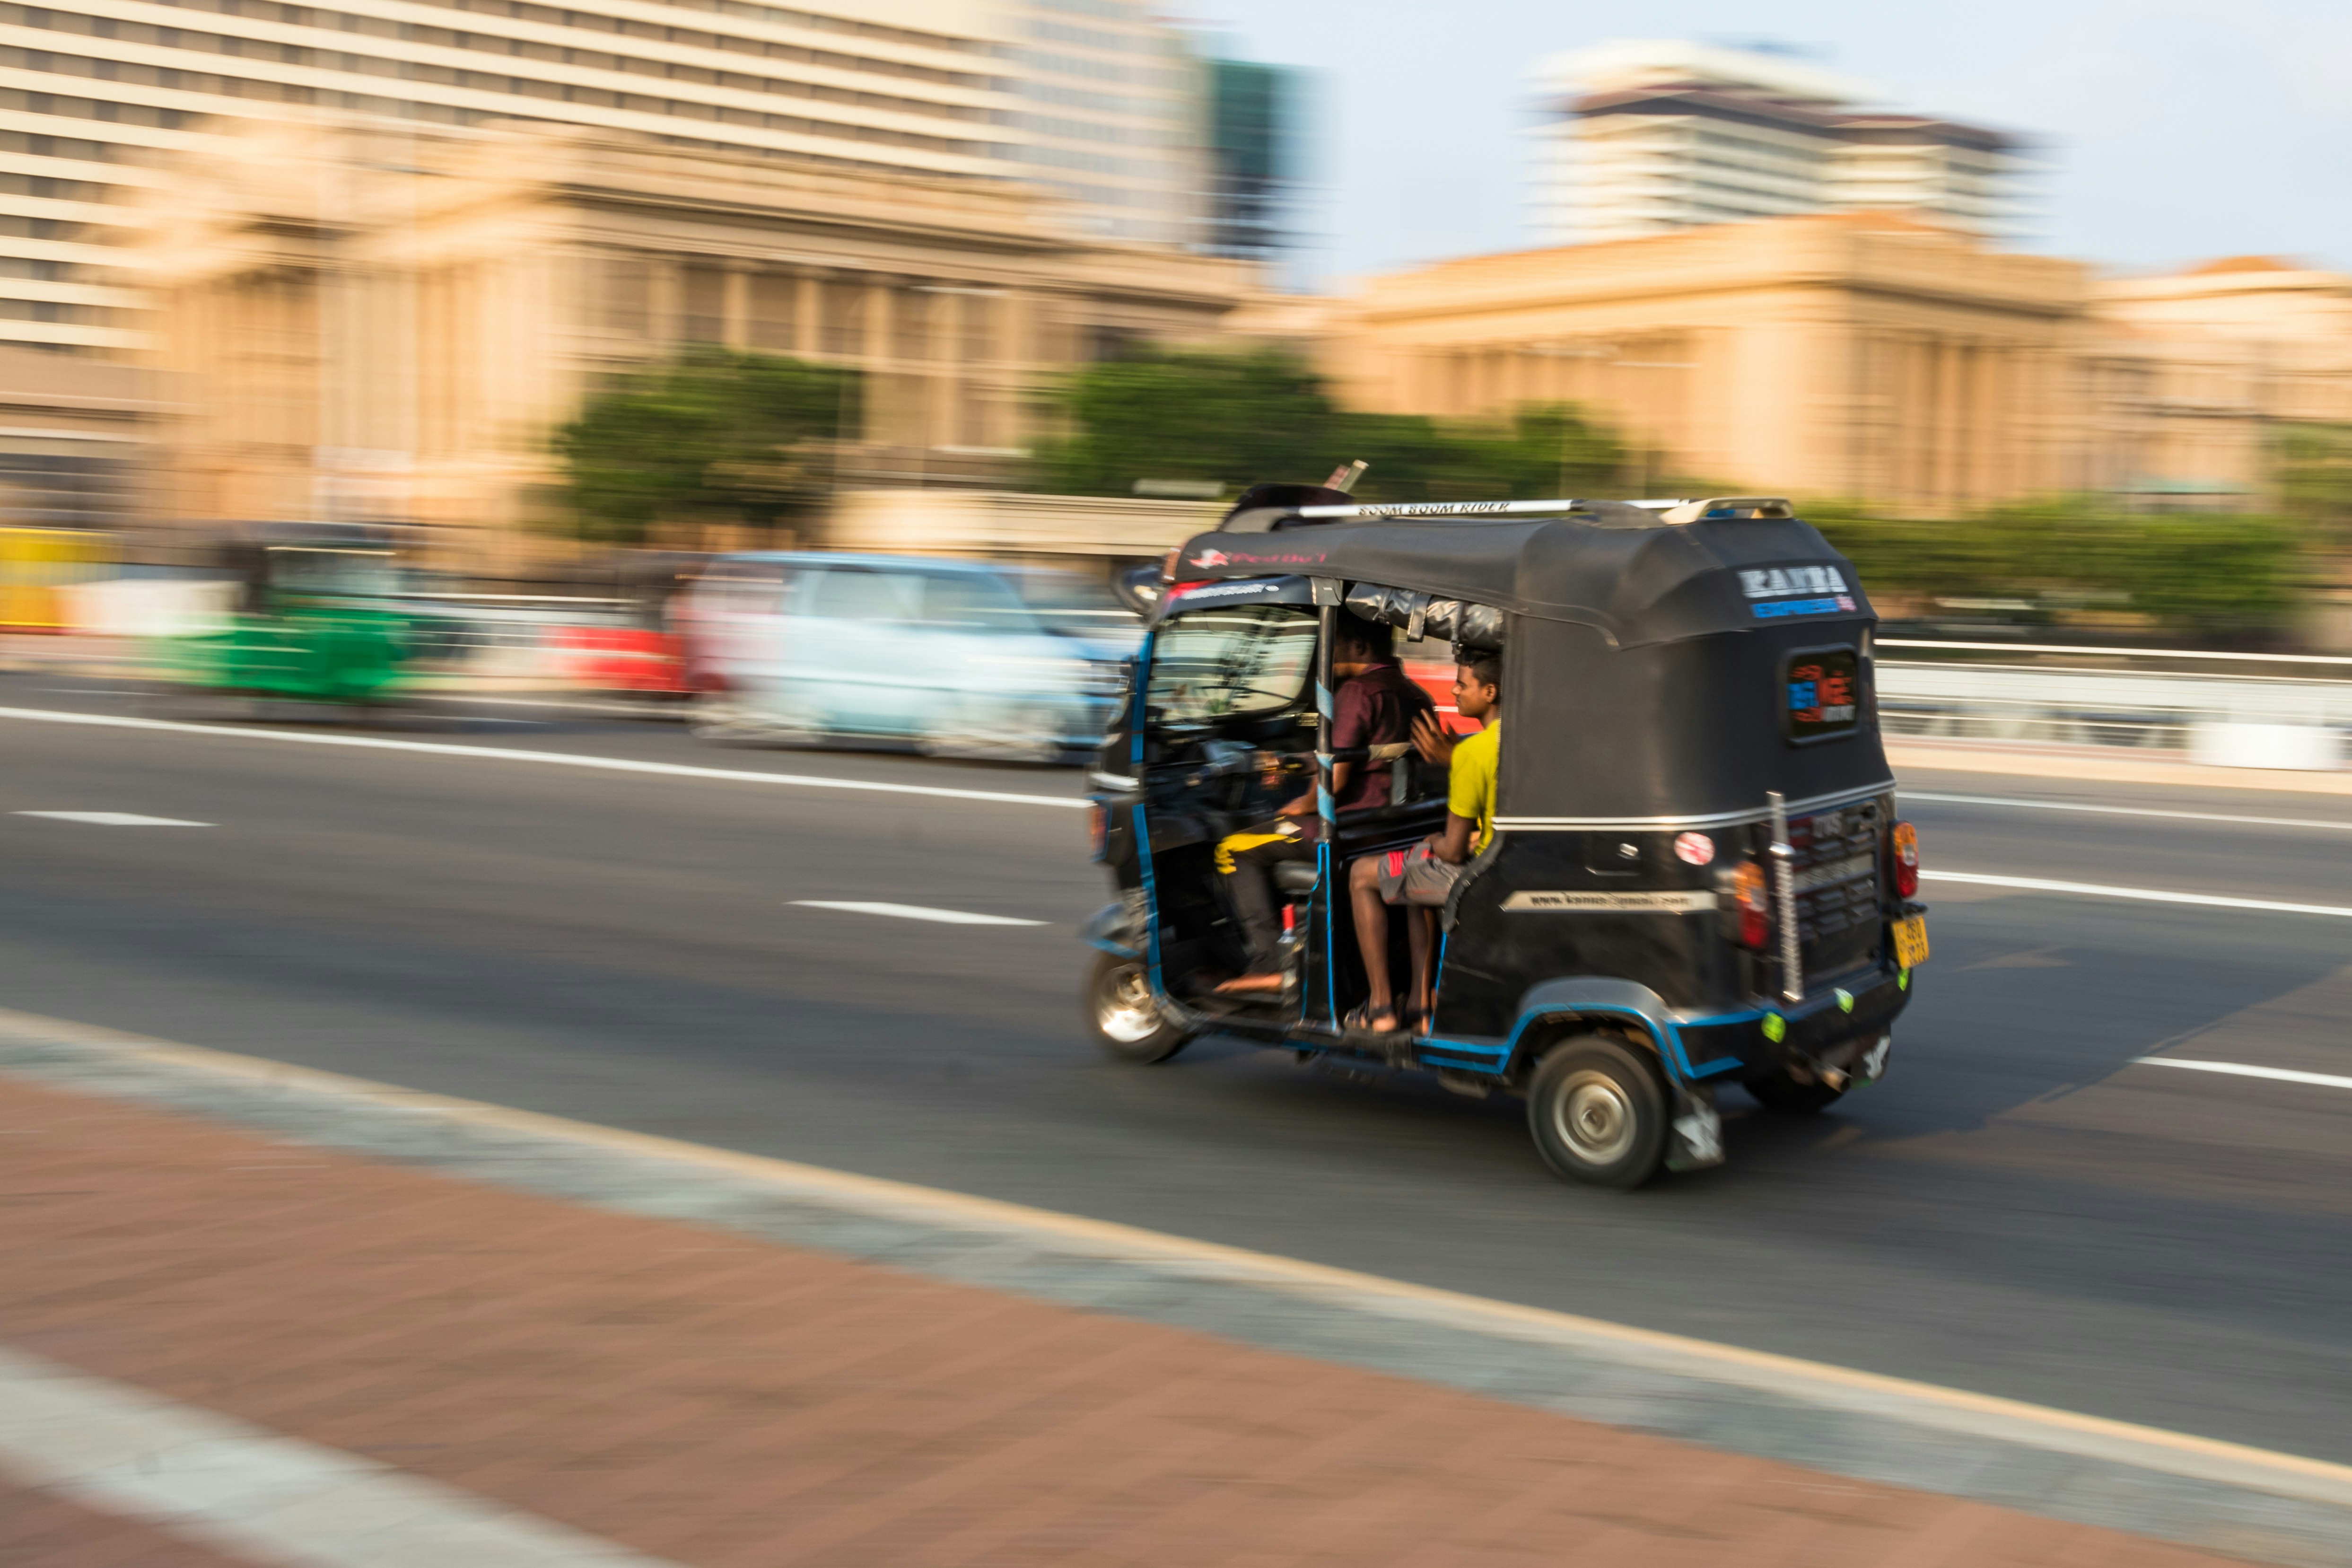 A black tuk tuk speeds along a street in Colombo, Sri Lanka. The vehicle and passengers are sharply in focus, while the background is blurred, giving the impression the tuk tuk is travelling as great speed.